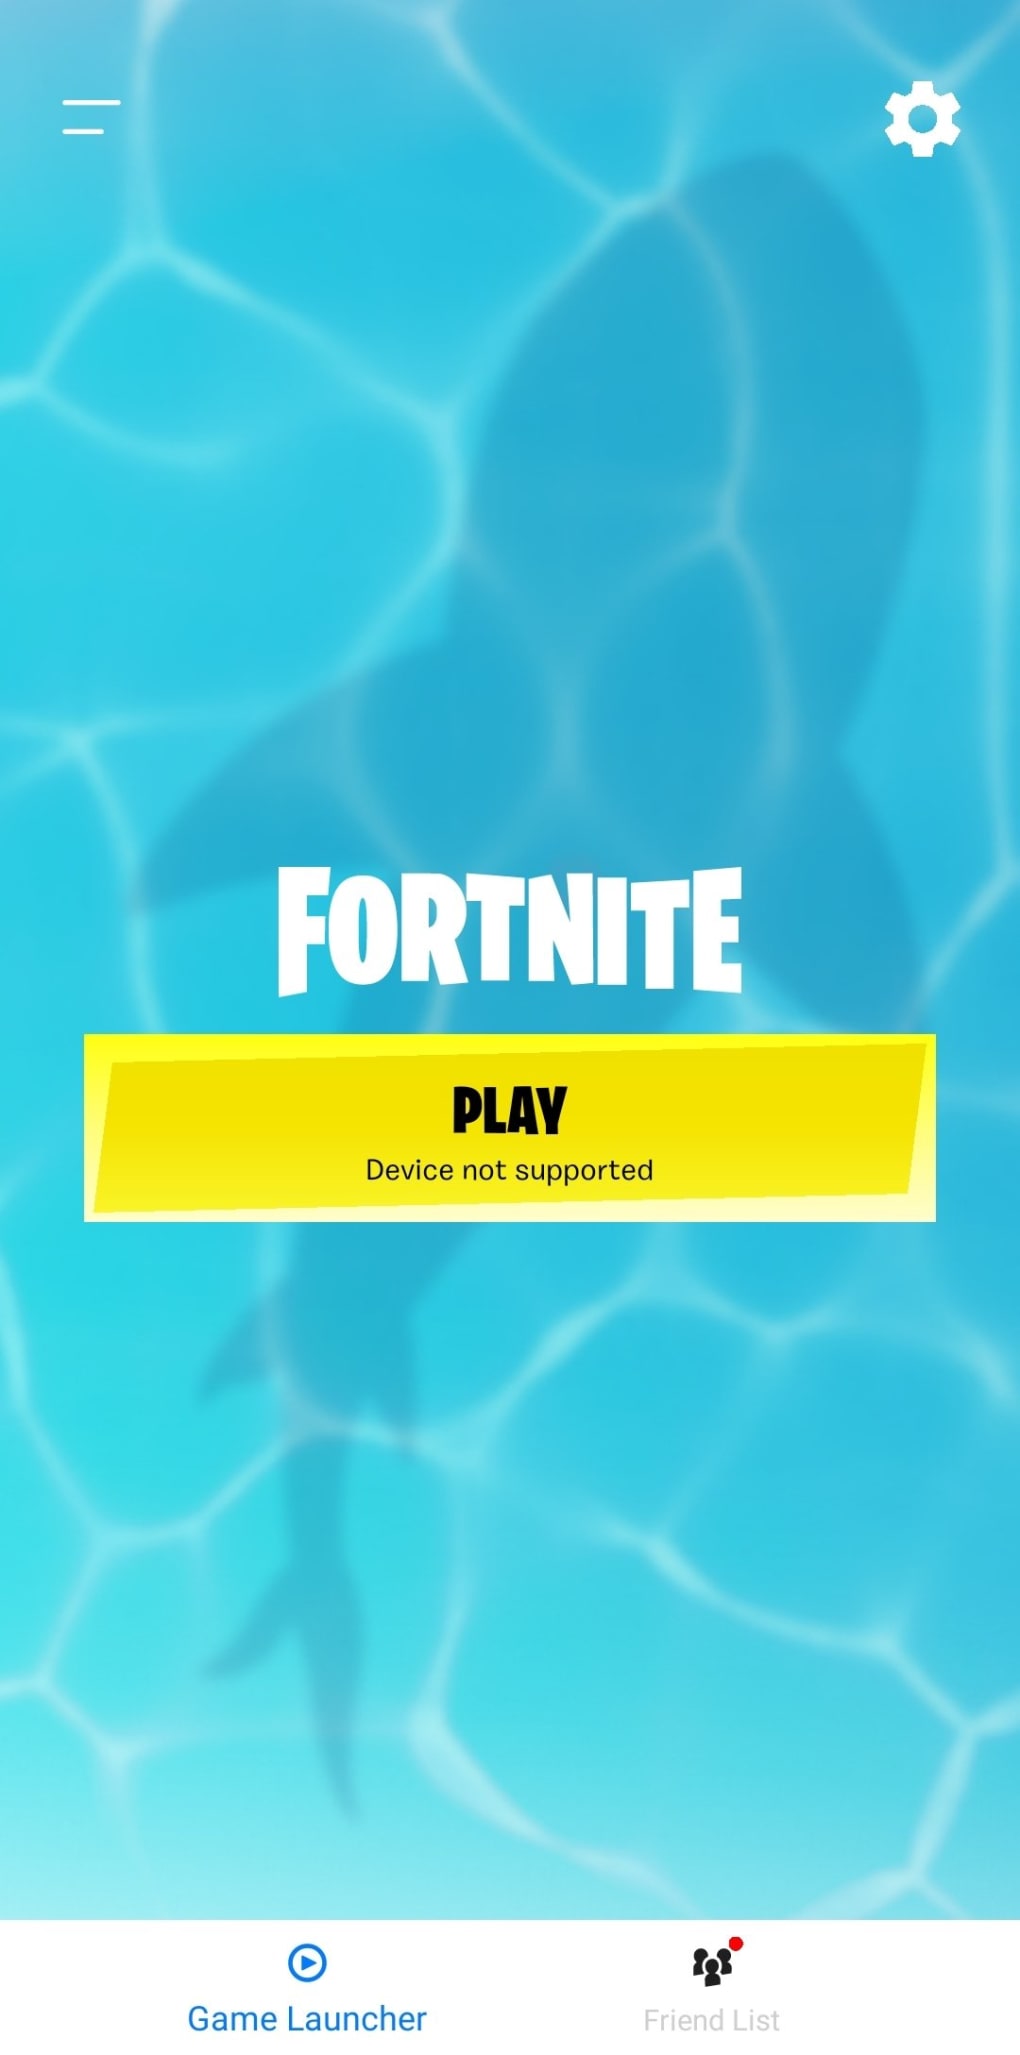 How to download 'Fortnite' onto your Android using a workaround